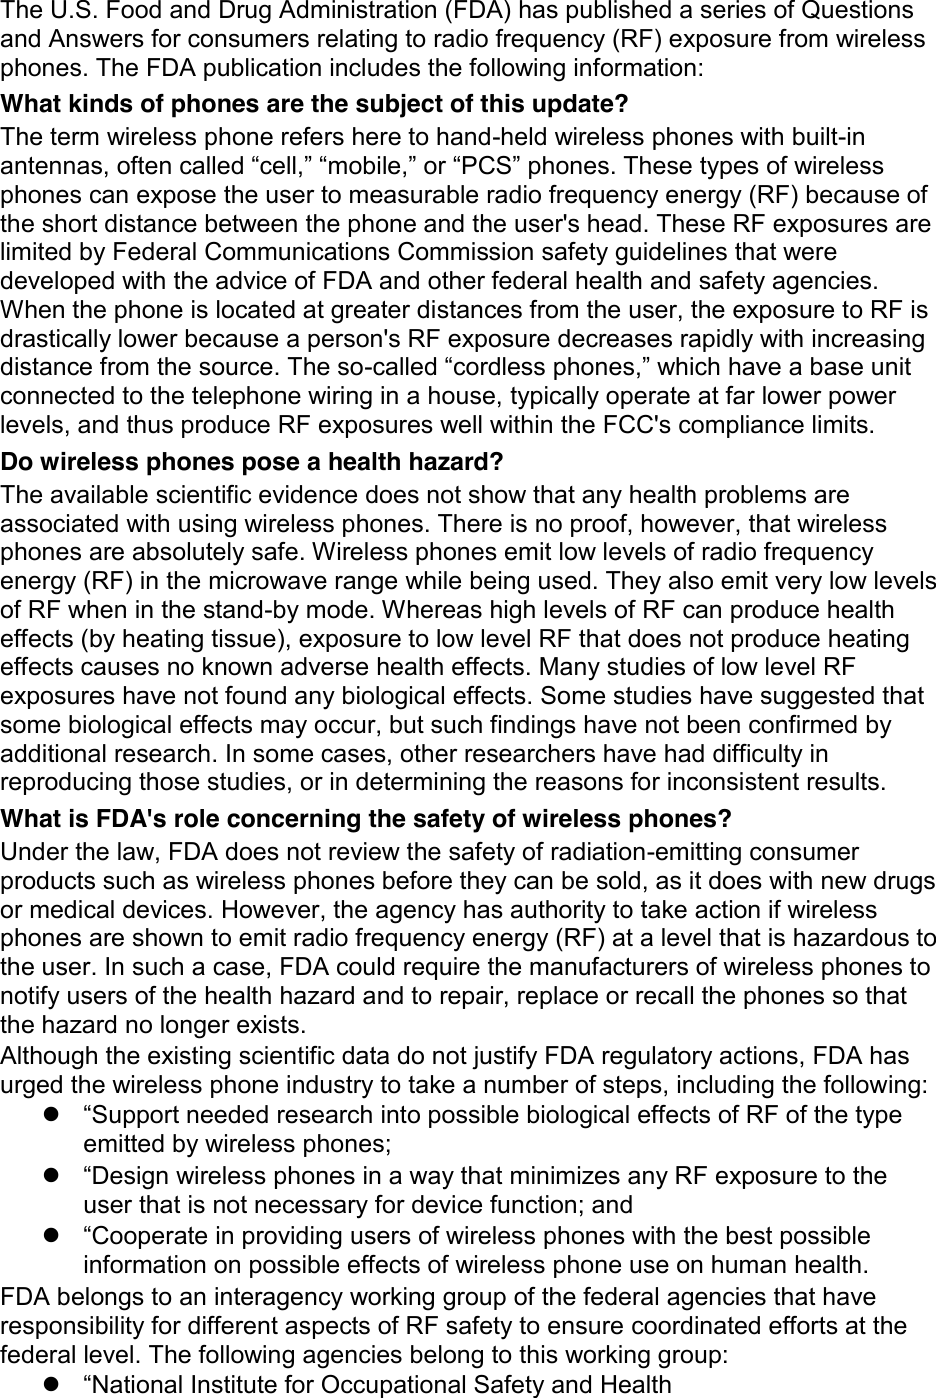 The U.S. Food and Drug Administration (FDA) has published a series of Questions and Answers for consumers relating to radio frequency (RF) exposure from wireless phones. The FDA publication includes the following information: What kinds of phones are the subject of this update? The term wireless phone refers here to hand-held wireless phones with built-in antennas, often called “cell,” “mobile,” or “PCS” phones. These types of wireless phones can expose the user to measurable radio frequency energy (RF) because of the short distance between the phone and the user&apos;s head. These RF exposures are limited by Federal Communications Commission safety guidelines that were developed with the advice of FDA and other federal health and safety agencies. When the phone is located at greater distances from the user, the exposure to RF is drastically lower because a person&apos;s RF exposure decreases rapidly with increasing distance from the source. The so-called “cordless phones,” which have a base unit connected to the telephone wiring in a house, typically operate at far lower power levels, and thus produce RF exposures well within the FCC&apos;s compliance limits. Do wireless phones pose a health hazard? The available scientific evidence does not show that any health problems are associated with using wireless phones. There is no proof, however, that wireless phones are absolutely safe. Wireless phones emit low levels of radio frequency energy (RF) in the microwave range while being used. They also emit very low levels of RF when in the stand-by mode. Whereas high levels of RF can produce health effects (by heating tissue), exposure to low level RF that does not produce heating effects causes no known adverse health effects. Many studies of low level RF exposures have not found any biological effects. Some studies have suggested that some biological effects may occur, but such findings have not been confirmed by additional research. In some cases, other researchers have had difficulty in reproducing those studies, or in determining the reasons for inconsistent results. What is FDA&apos;s role concerning the safety of wireless phones? Under the law, FDA does not review the safety of radiation-emitting consumer products such as wireless phones before they can be sold, as it does with new drugs or medical devices. However, the agency has authority to take action if wireless phones are shown to emit radio frequency energy (RF) at a level that is hazardous to the user. In such a case, FDA could require the manufacturers of wireless phones to notify users of the health hazard and to repair, replace or recall the phones so that the hazard no longer exists. Although the existing scientific data do not justify FDA regulatory actions, FDA has urged the wireless phone industry to take a number of steps, including the following: z “Support needed research into possible biological effects of RF of the type emitted by wireless phones; z “Design wireless phones in a way that minimizes any RF exposure to the user that is not necessary for device function; and z “Cooperate in providing users of wireless phones with the best possible information on possible effects of wireless phone use on human health. FDA belongs to an interagency working group of the federal agencies that have responsibility for different aspects of RF safety to ensure coordinated efforts at the federal level. The following agencies belong to this working group: z “National Institute for Occupational Safety and Health 